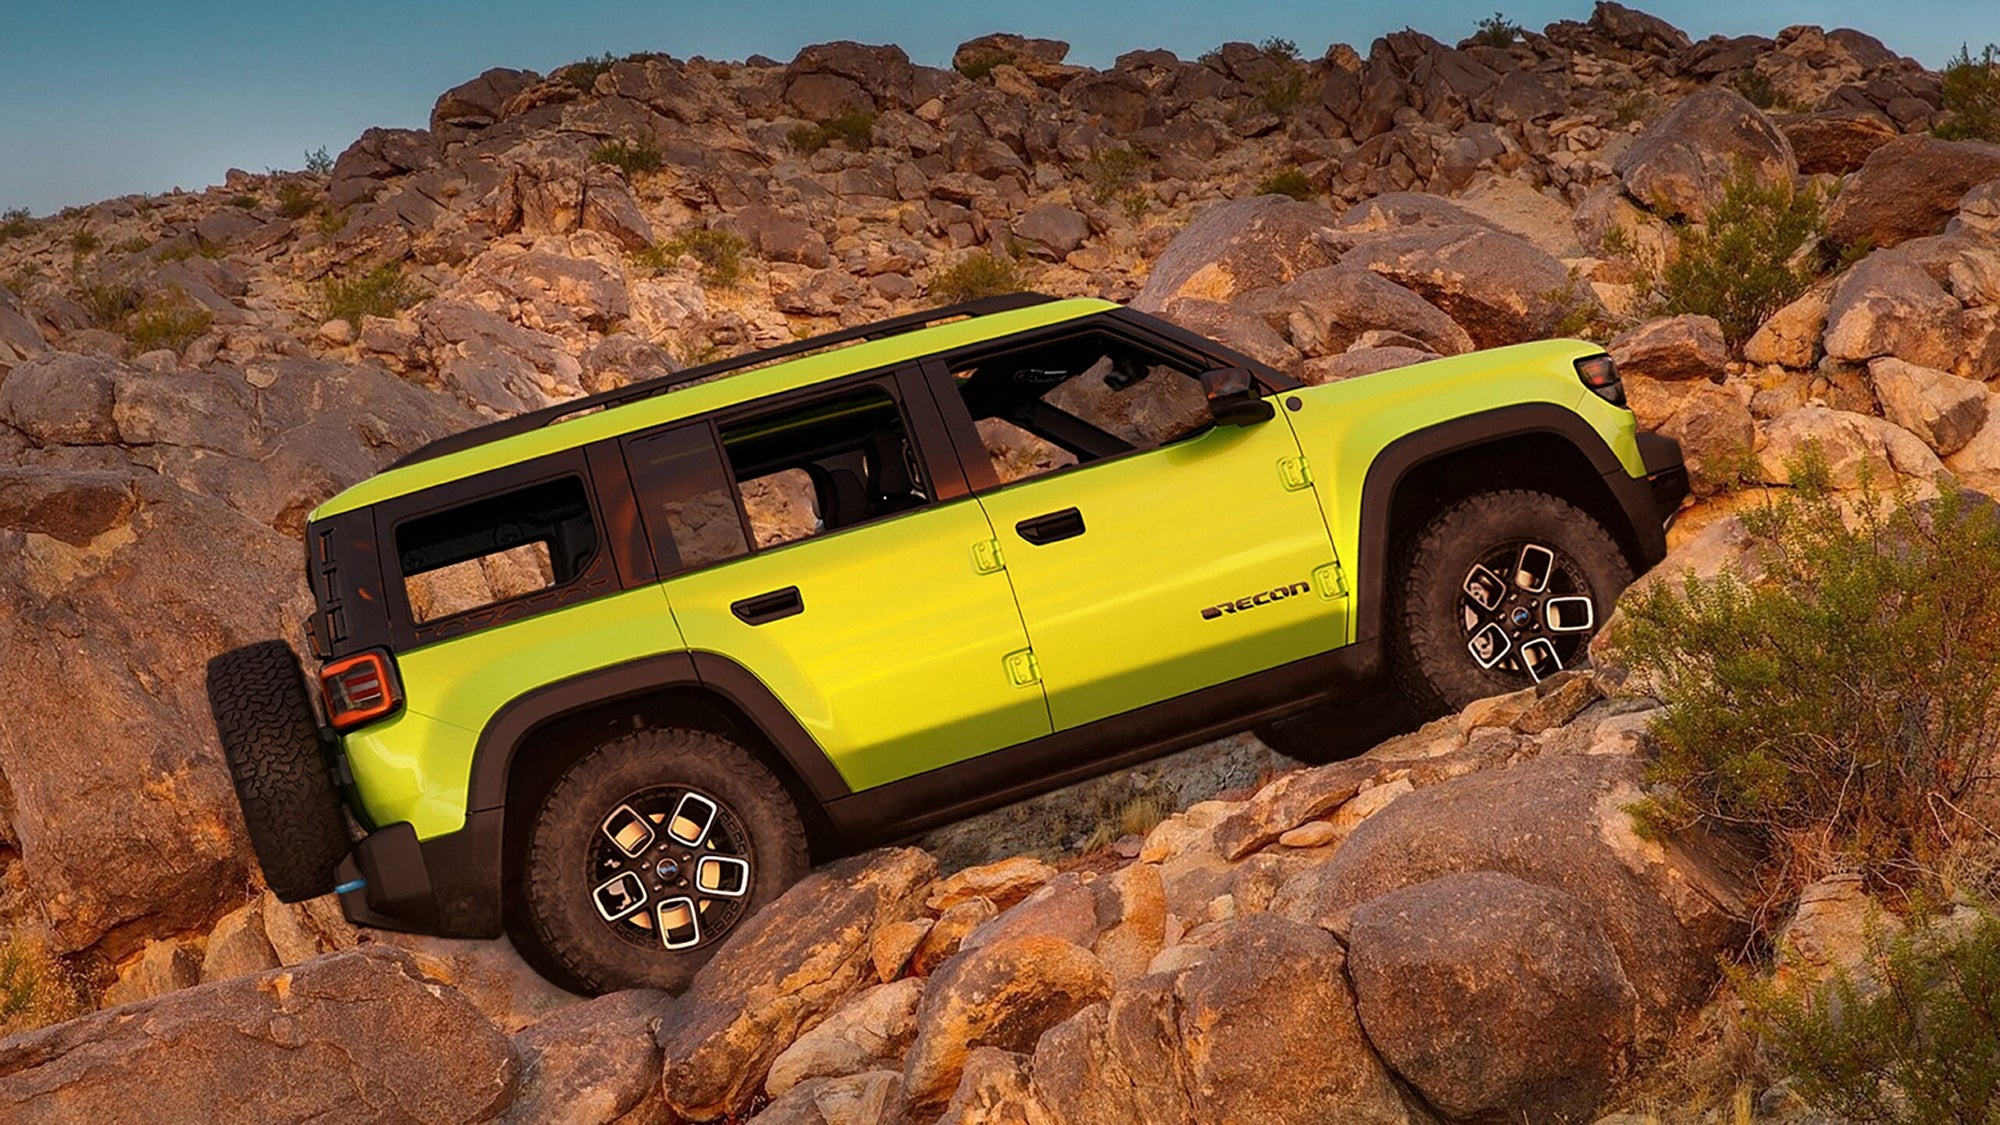 The Jeep Recon may not be solely electric after all